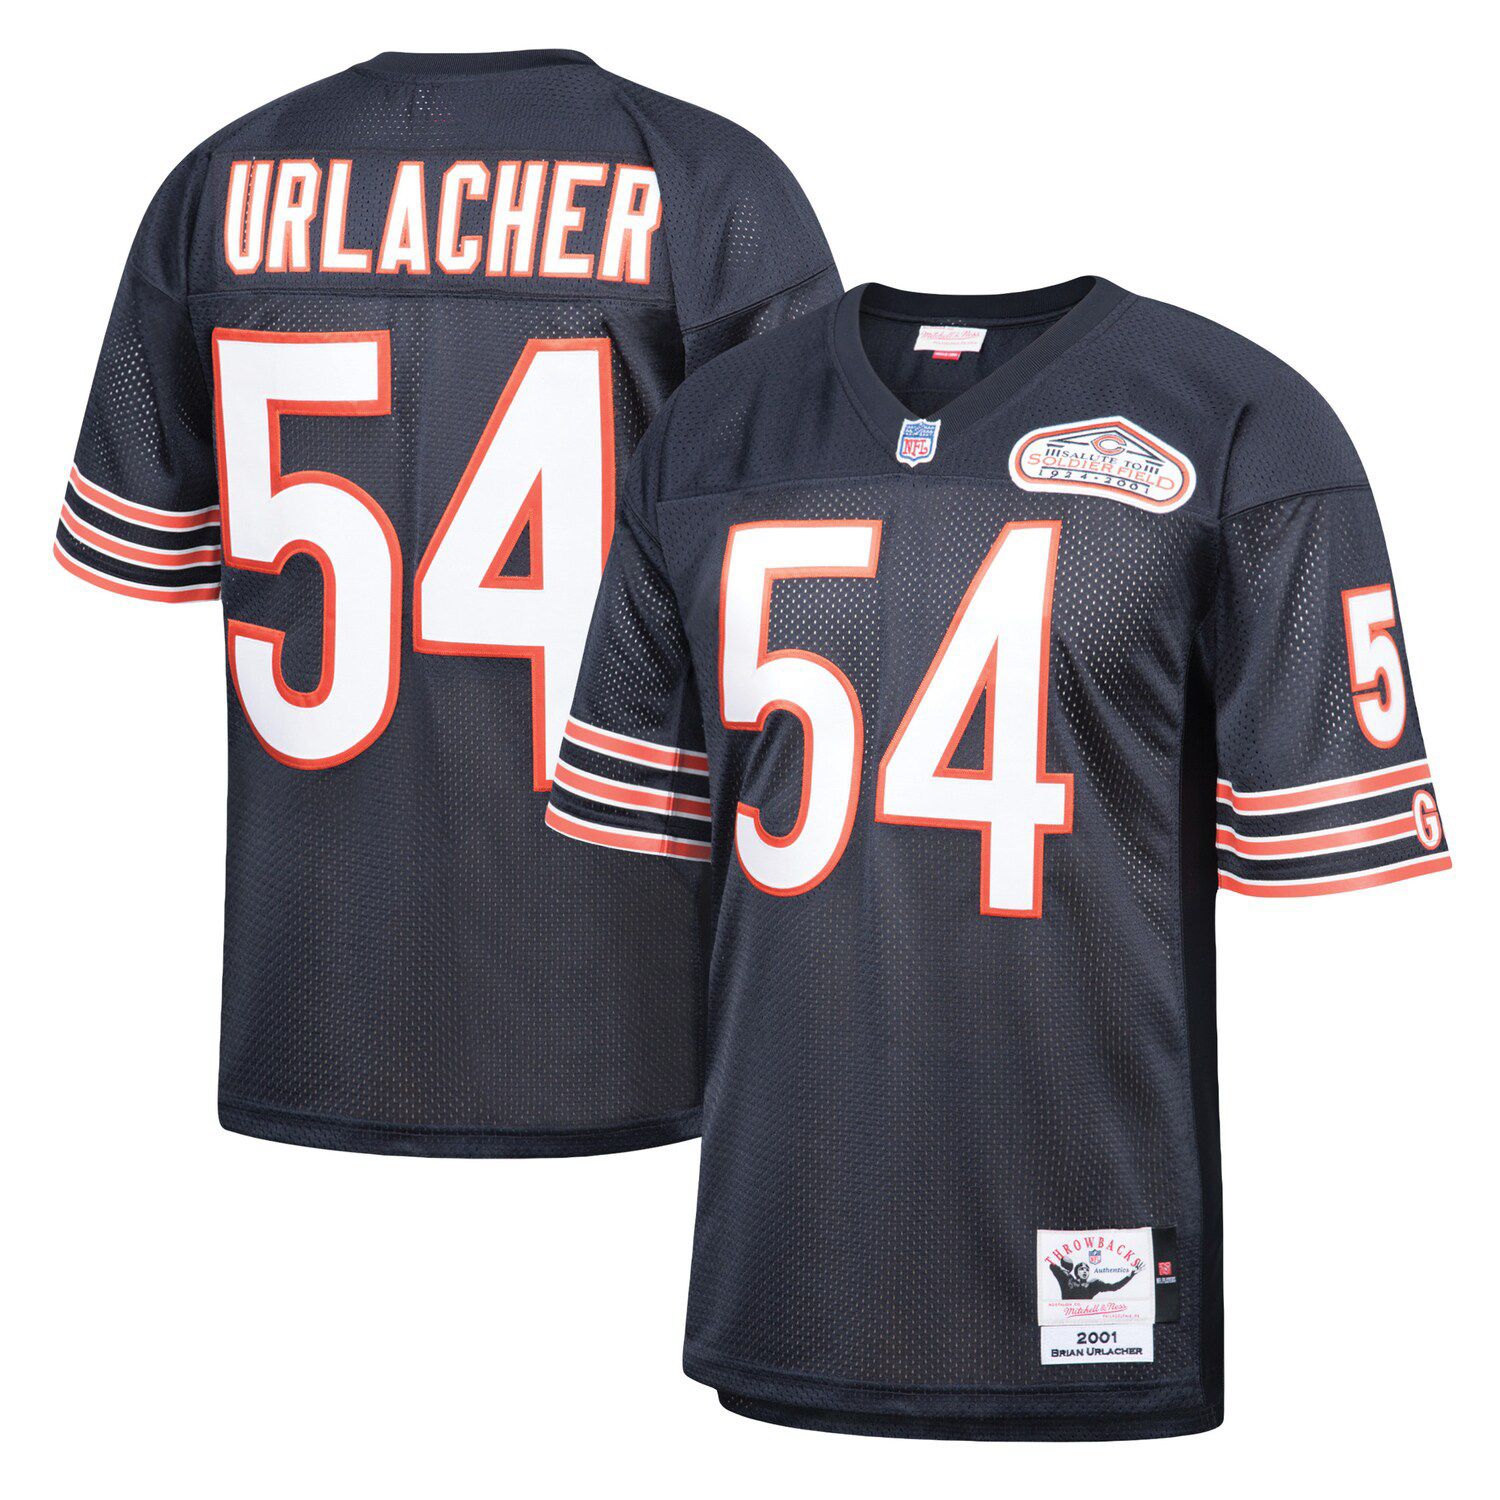 Image for Unbranded Men's Mitchell & Ness Brian Urlacher Navy Chicago Bears 2001 Authentic Throwback Retired Player Jersey at Kohl's.